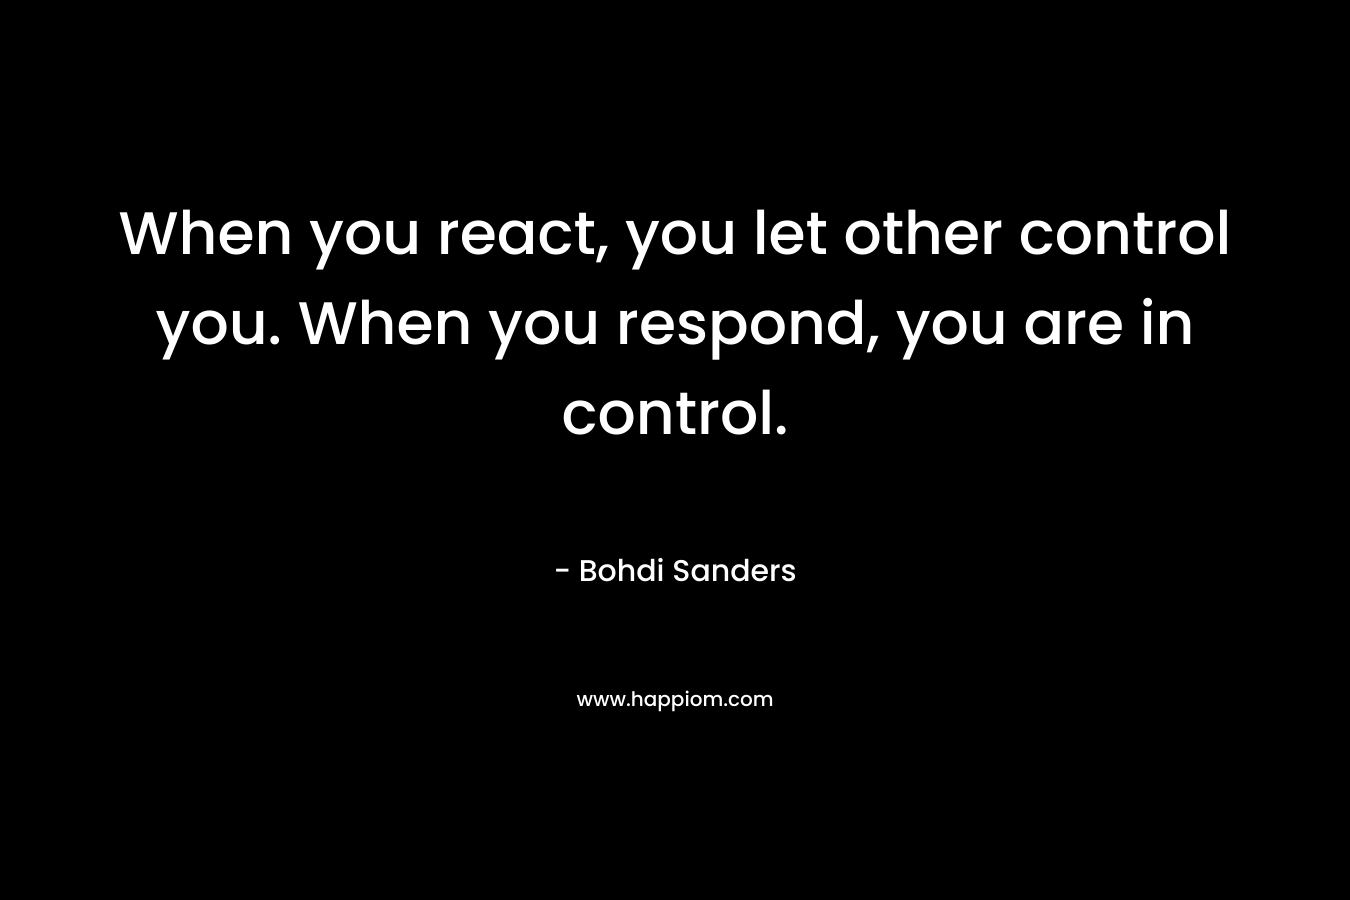 When you react, you let other control you. When you respond, you are in control. – Bohdi Sanders